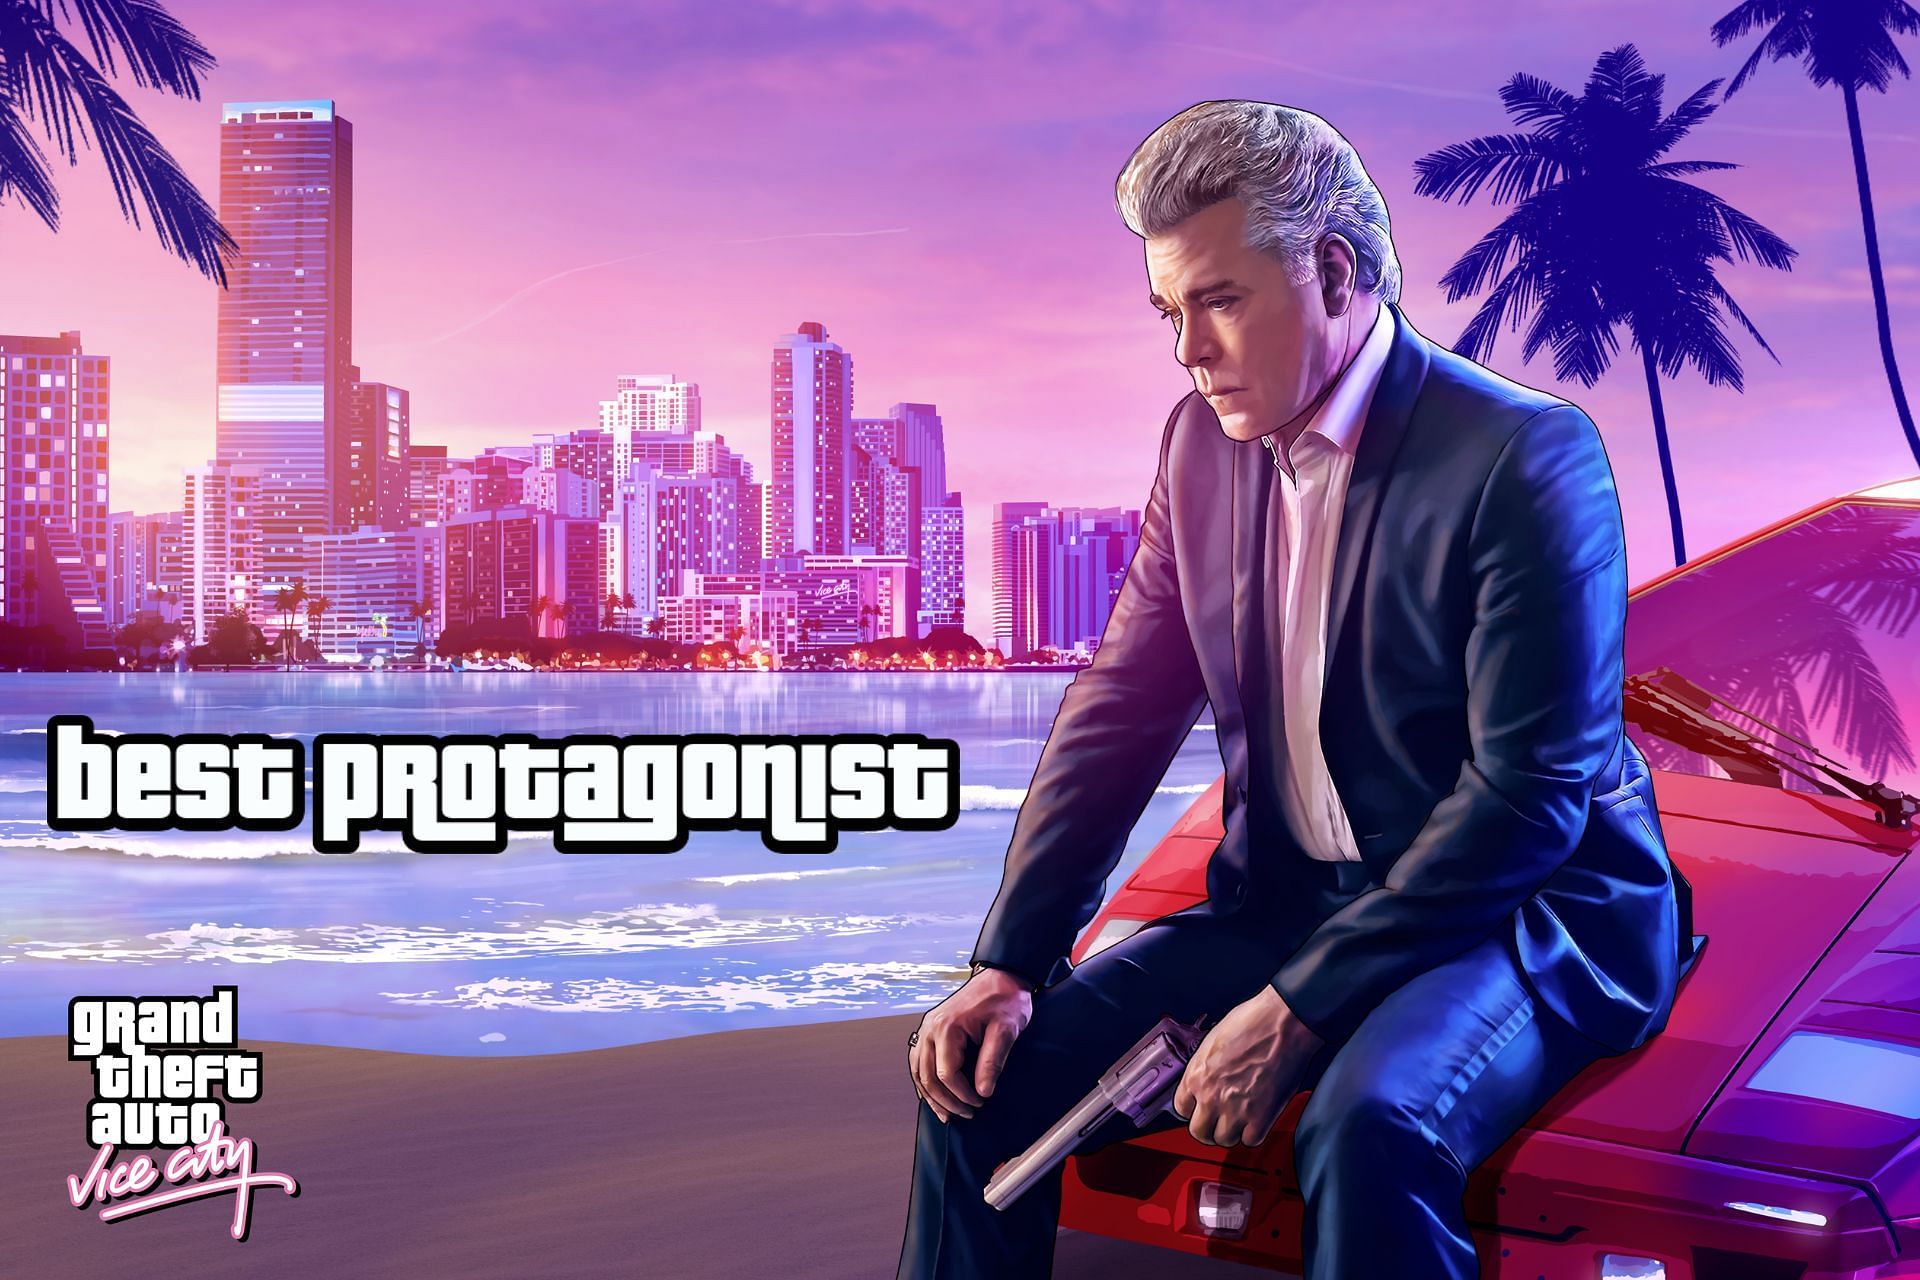 Tommy Vercetti is still regarded as one of the best protagonists by GTA fans (Image via Wallpaper Abyss)